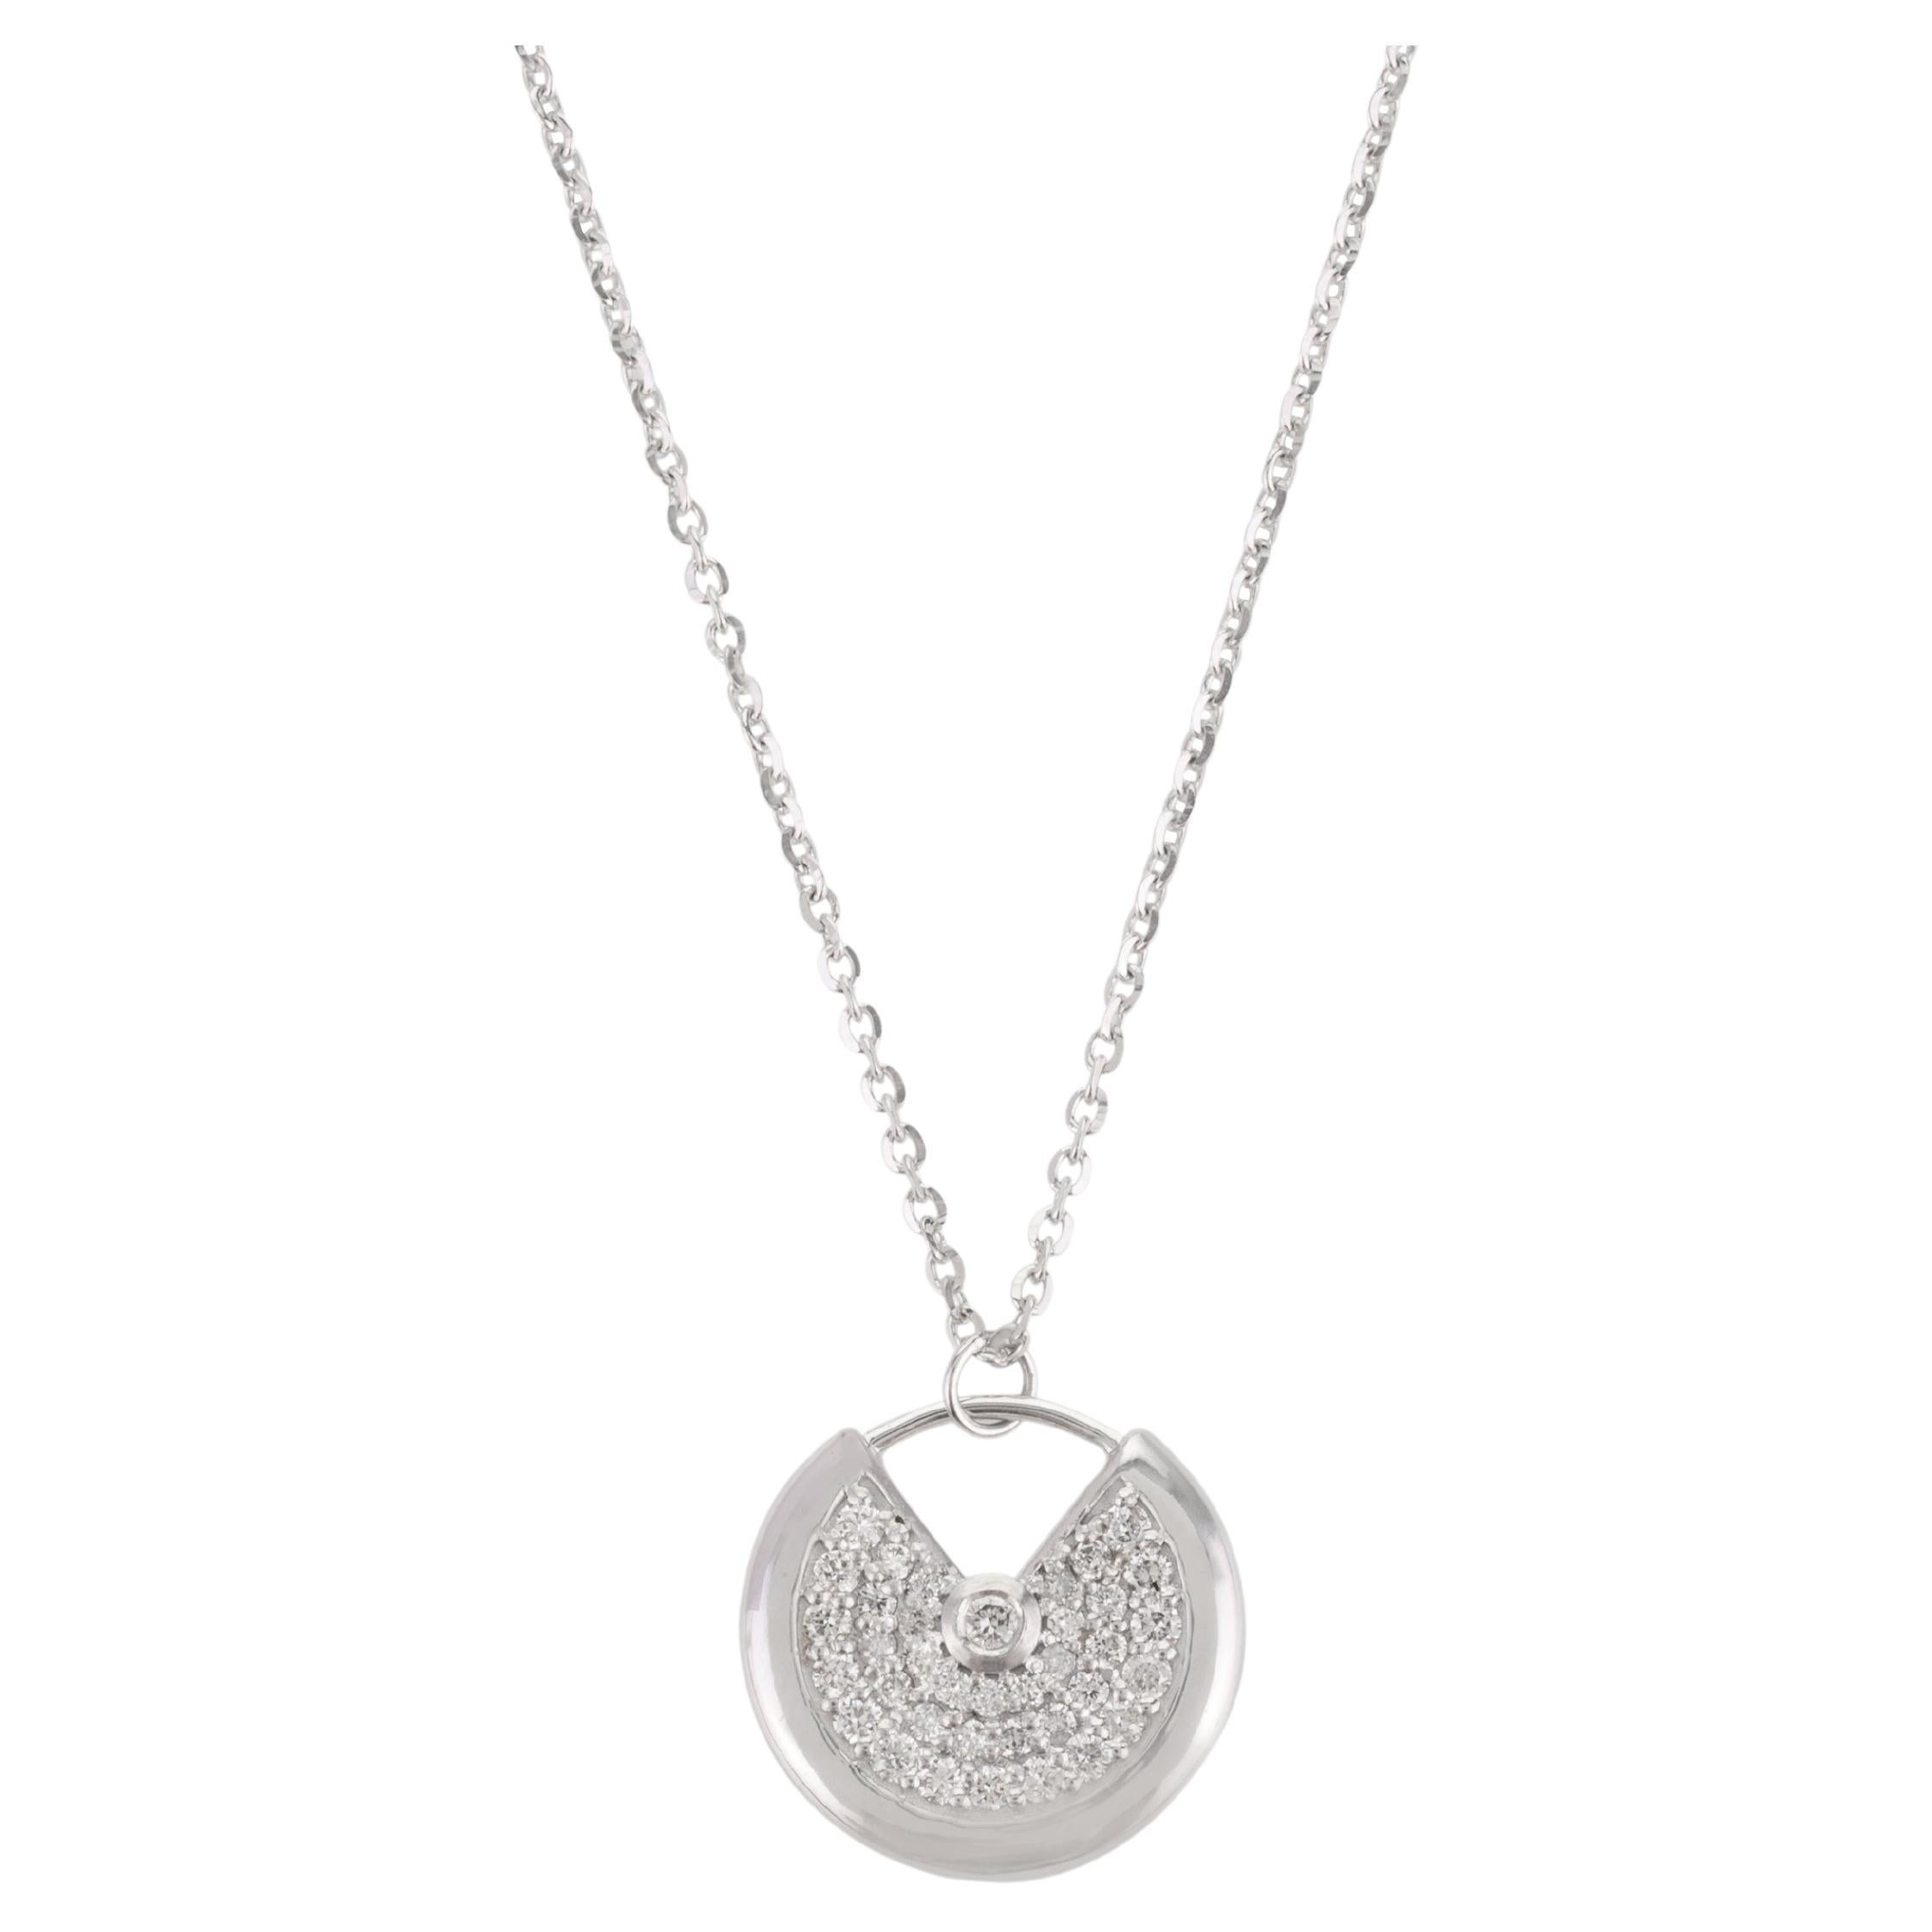 Real Diamond 14K Solid White Gold Elegant Disc Pendant Necklace for Her For Sale